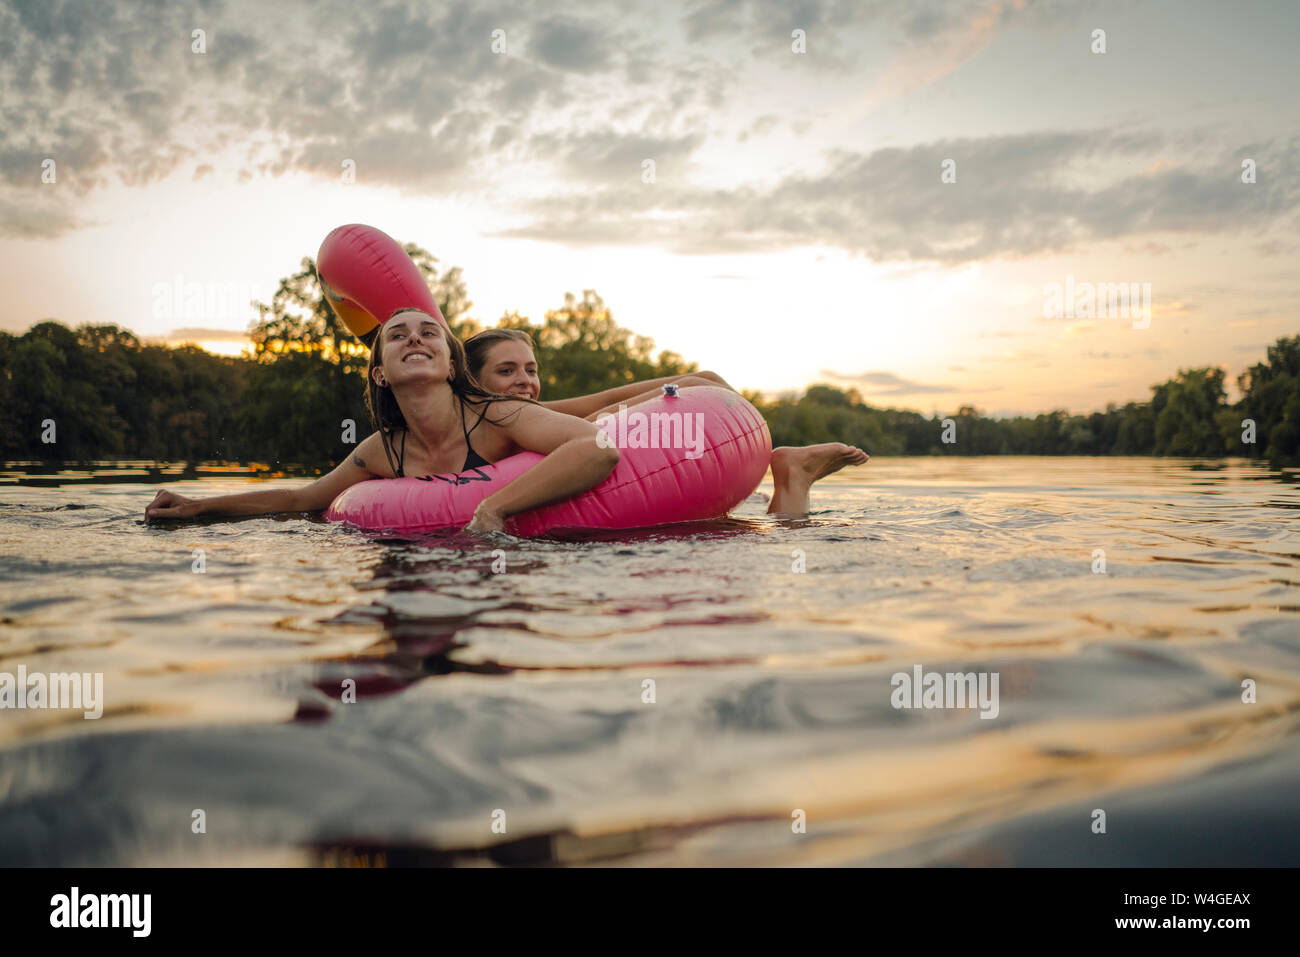 Friends having fun on a lake on a pink flamingo floating tire Stock Photo